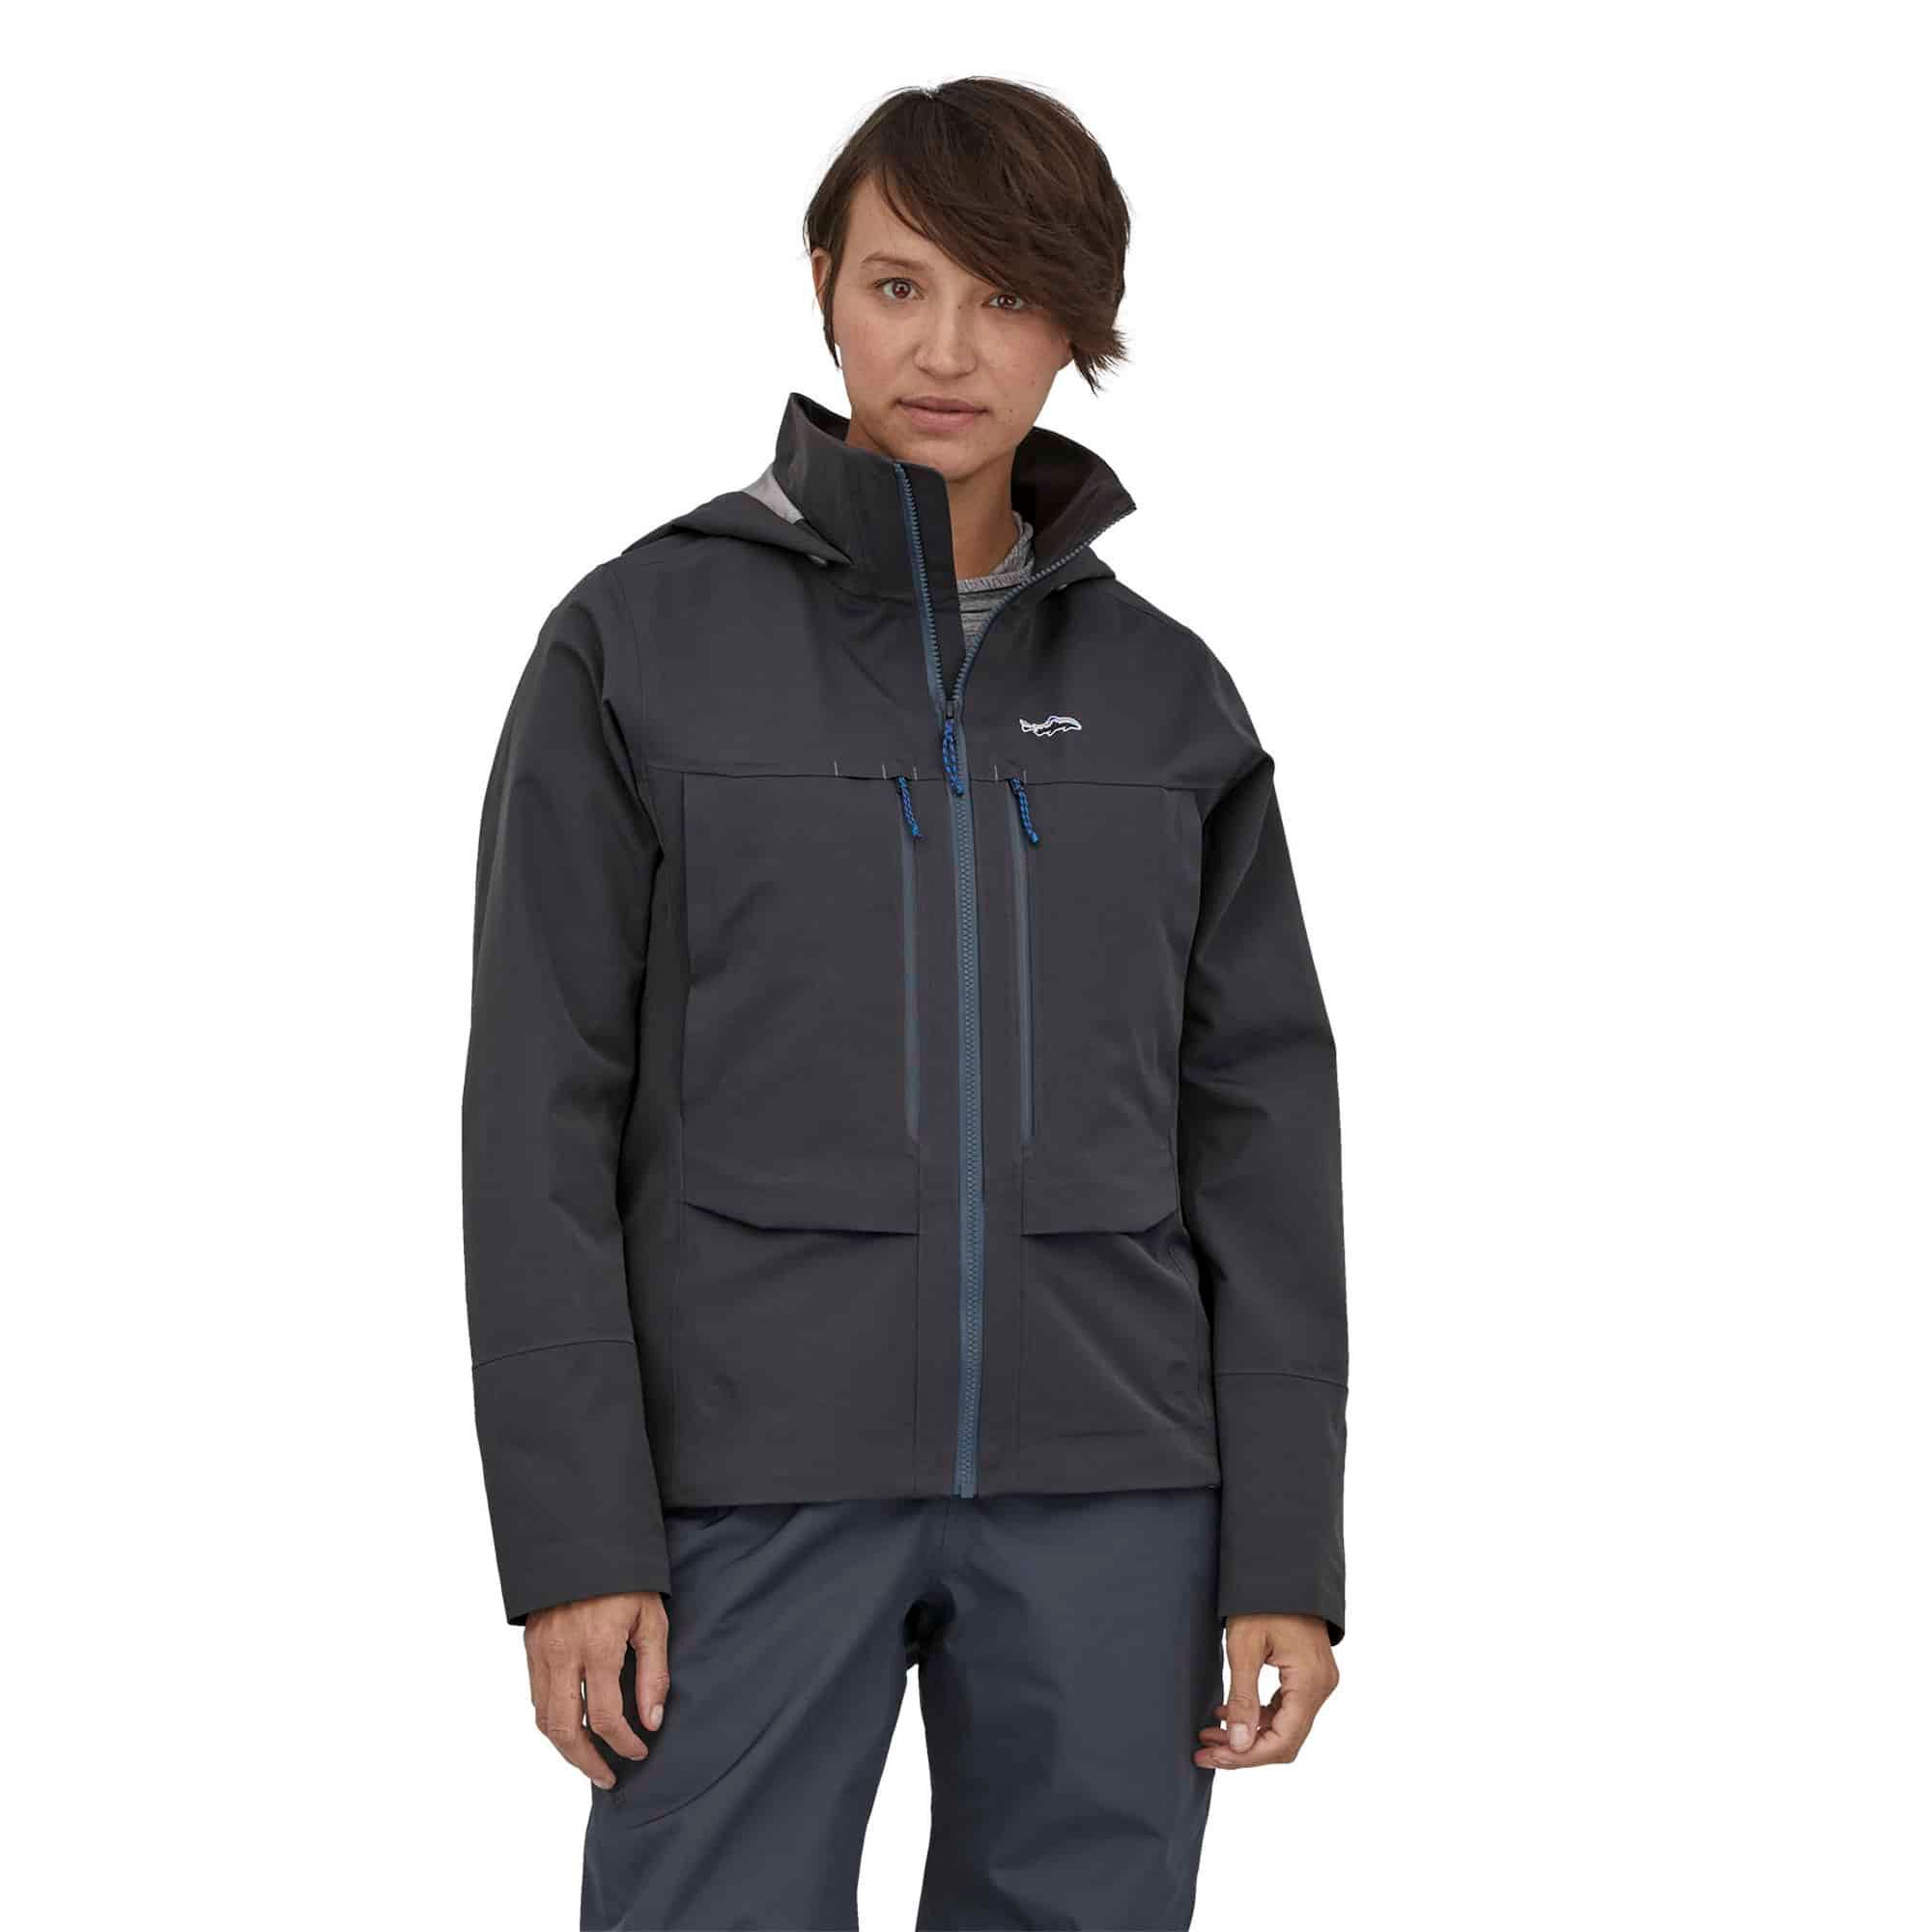 Patagonia Women’s Swiftcurrent Wading Jacket - Fin & Game